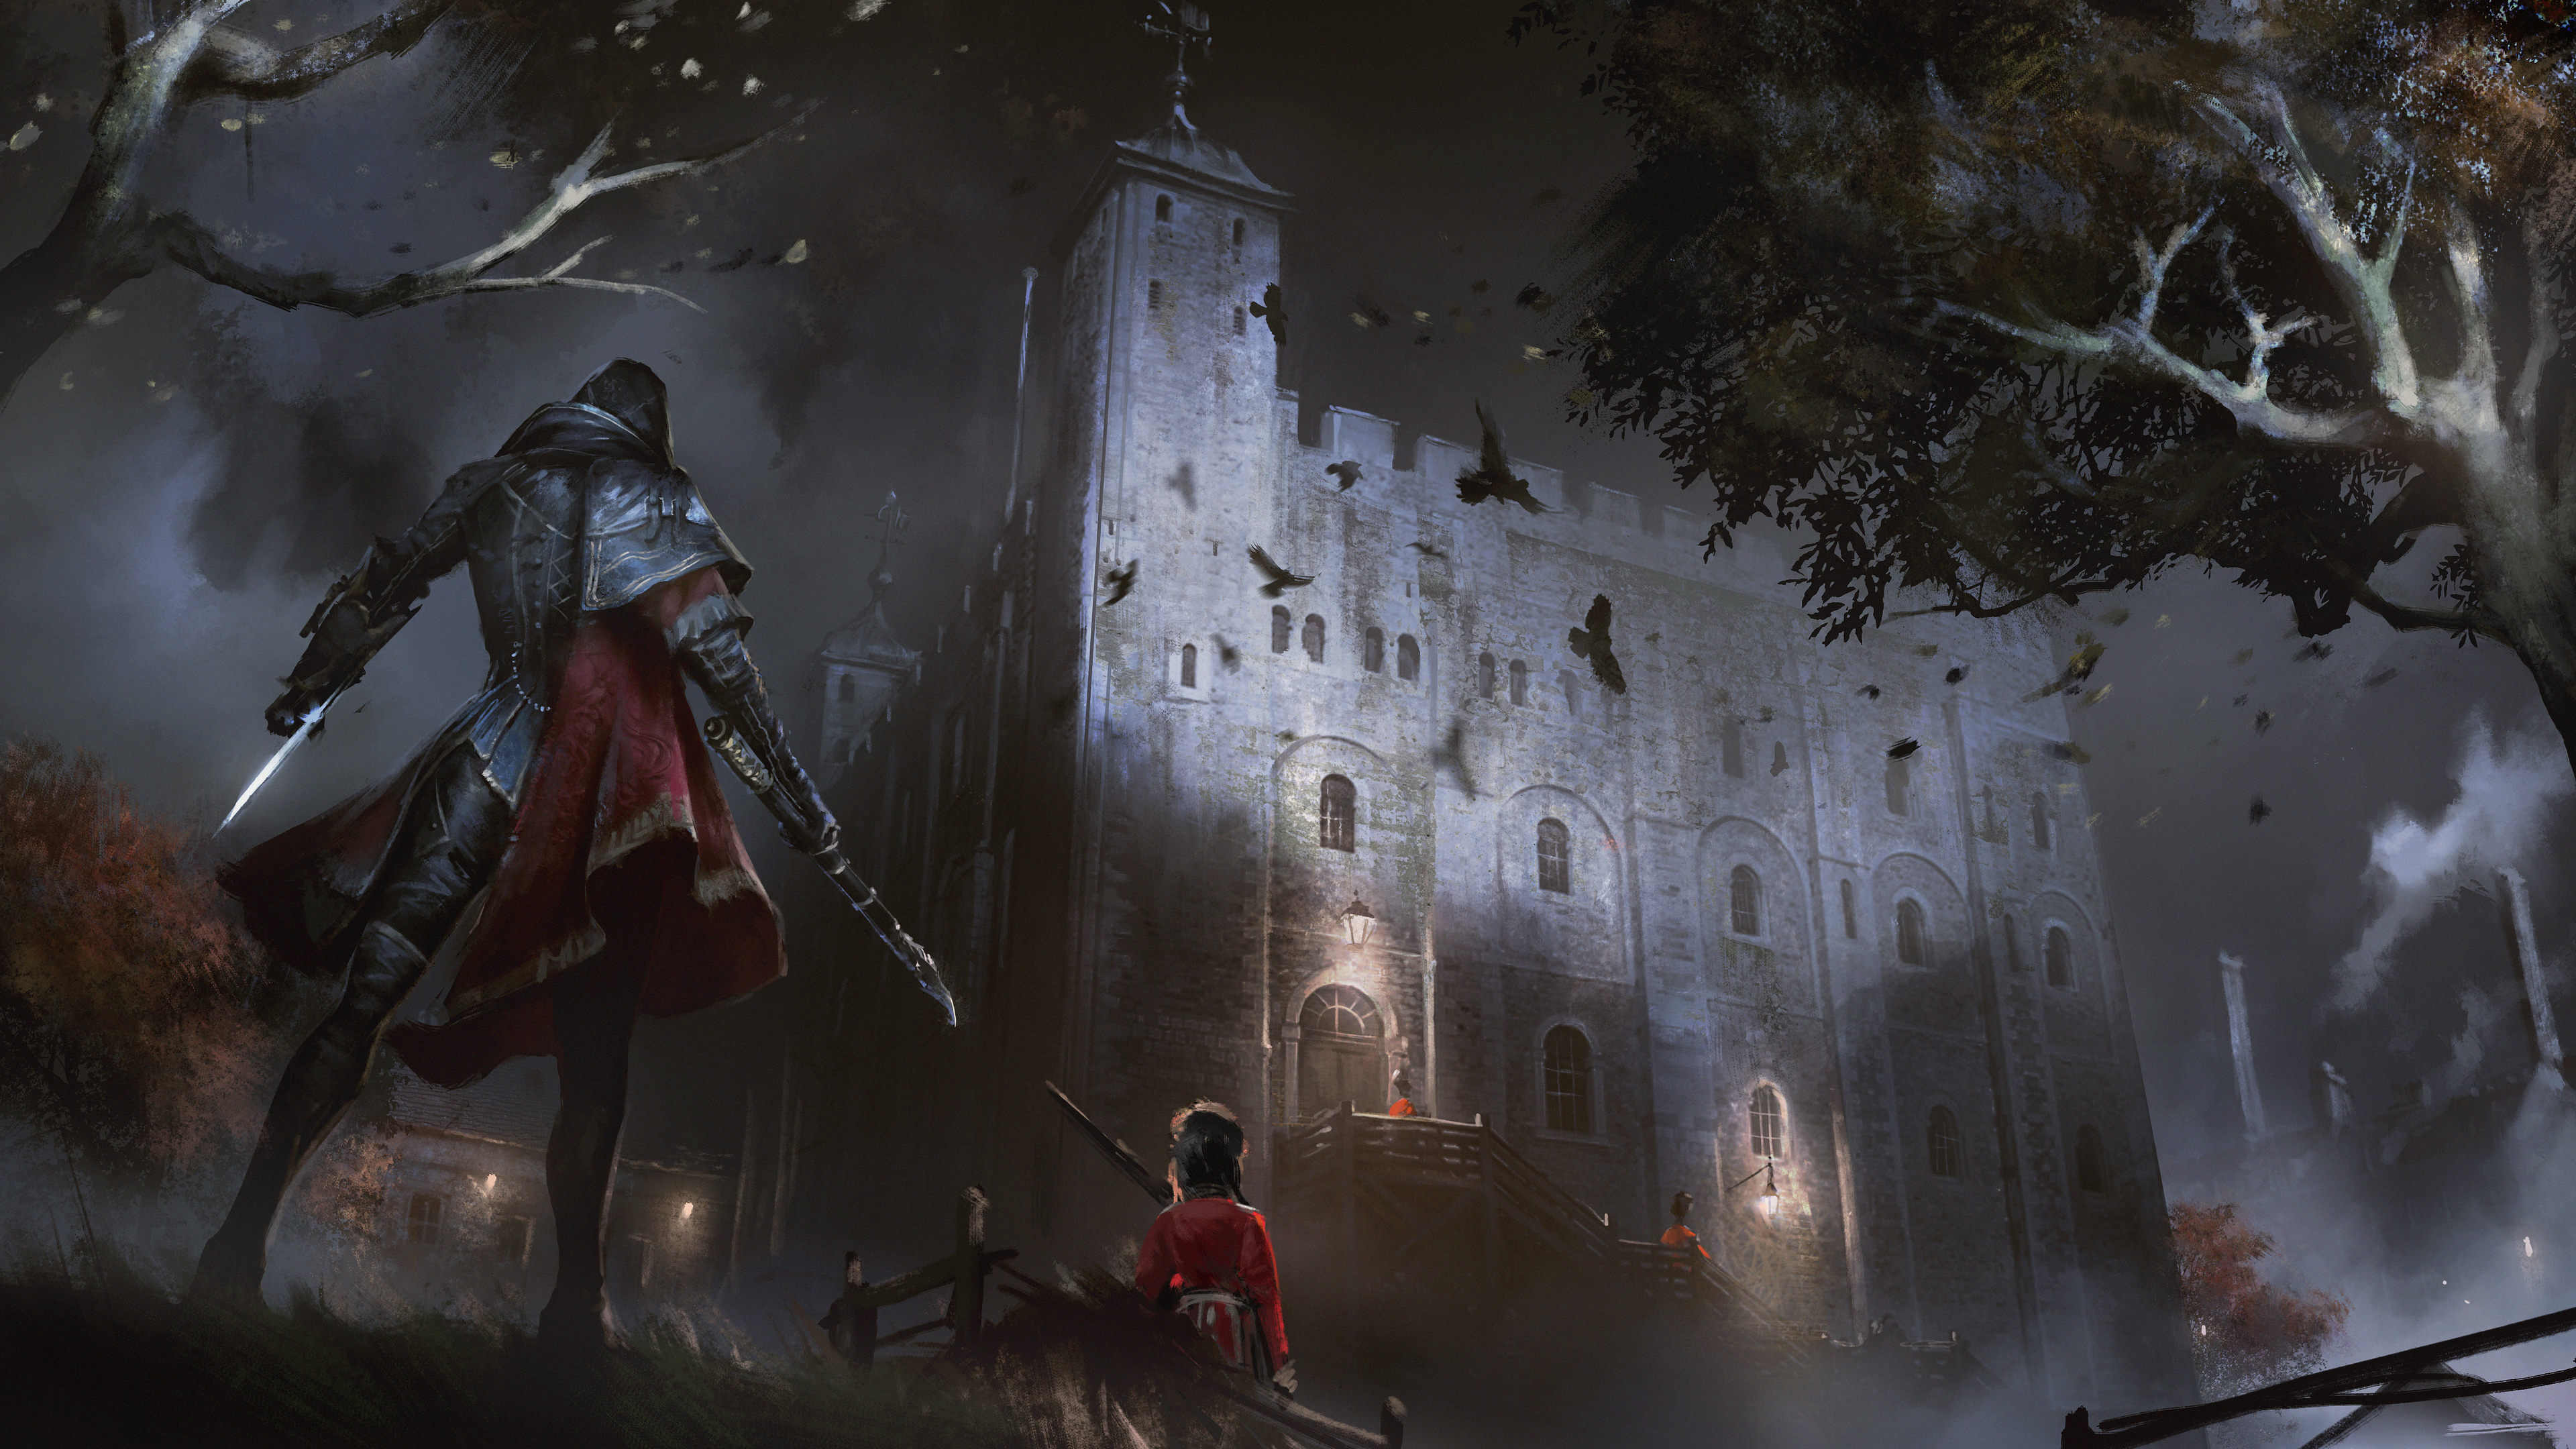 Wallpaper 4k Assassins Creed Syndicate Evie Frye 4k 2018 Games Wallpaper, 4k Wallpaper, Assassins Creed Syndicate Wallpaper, Assassins Creed Wallpaper, Games Wallpaper, Hd Wallpaper